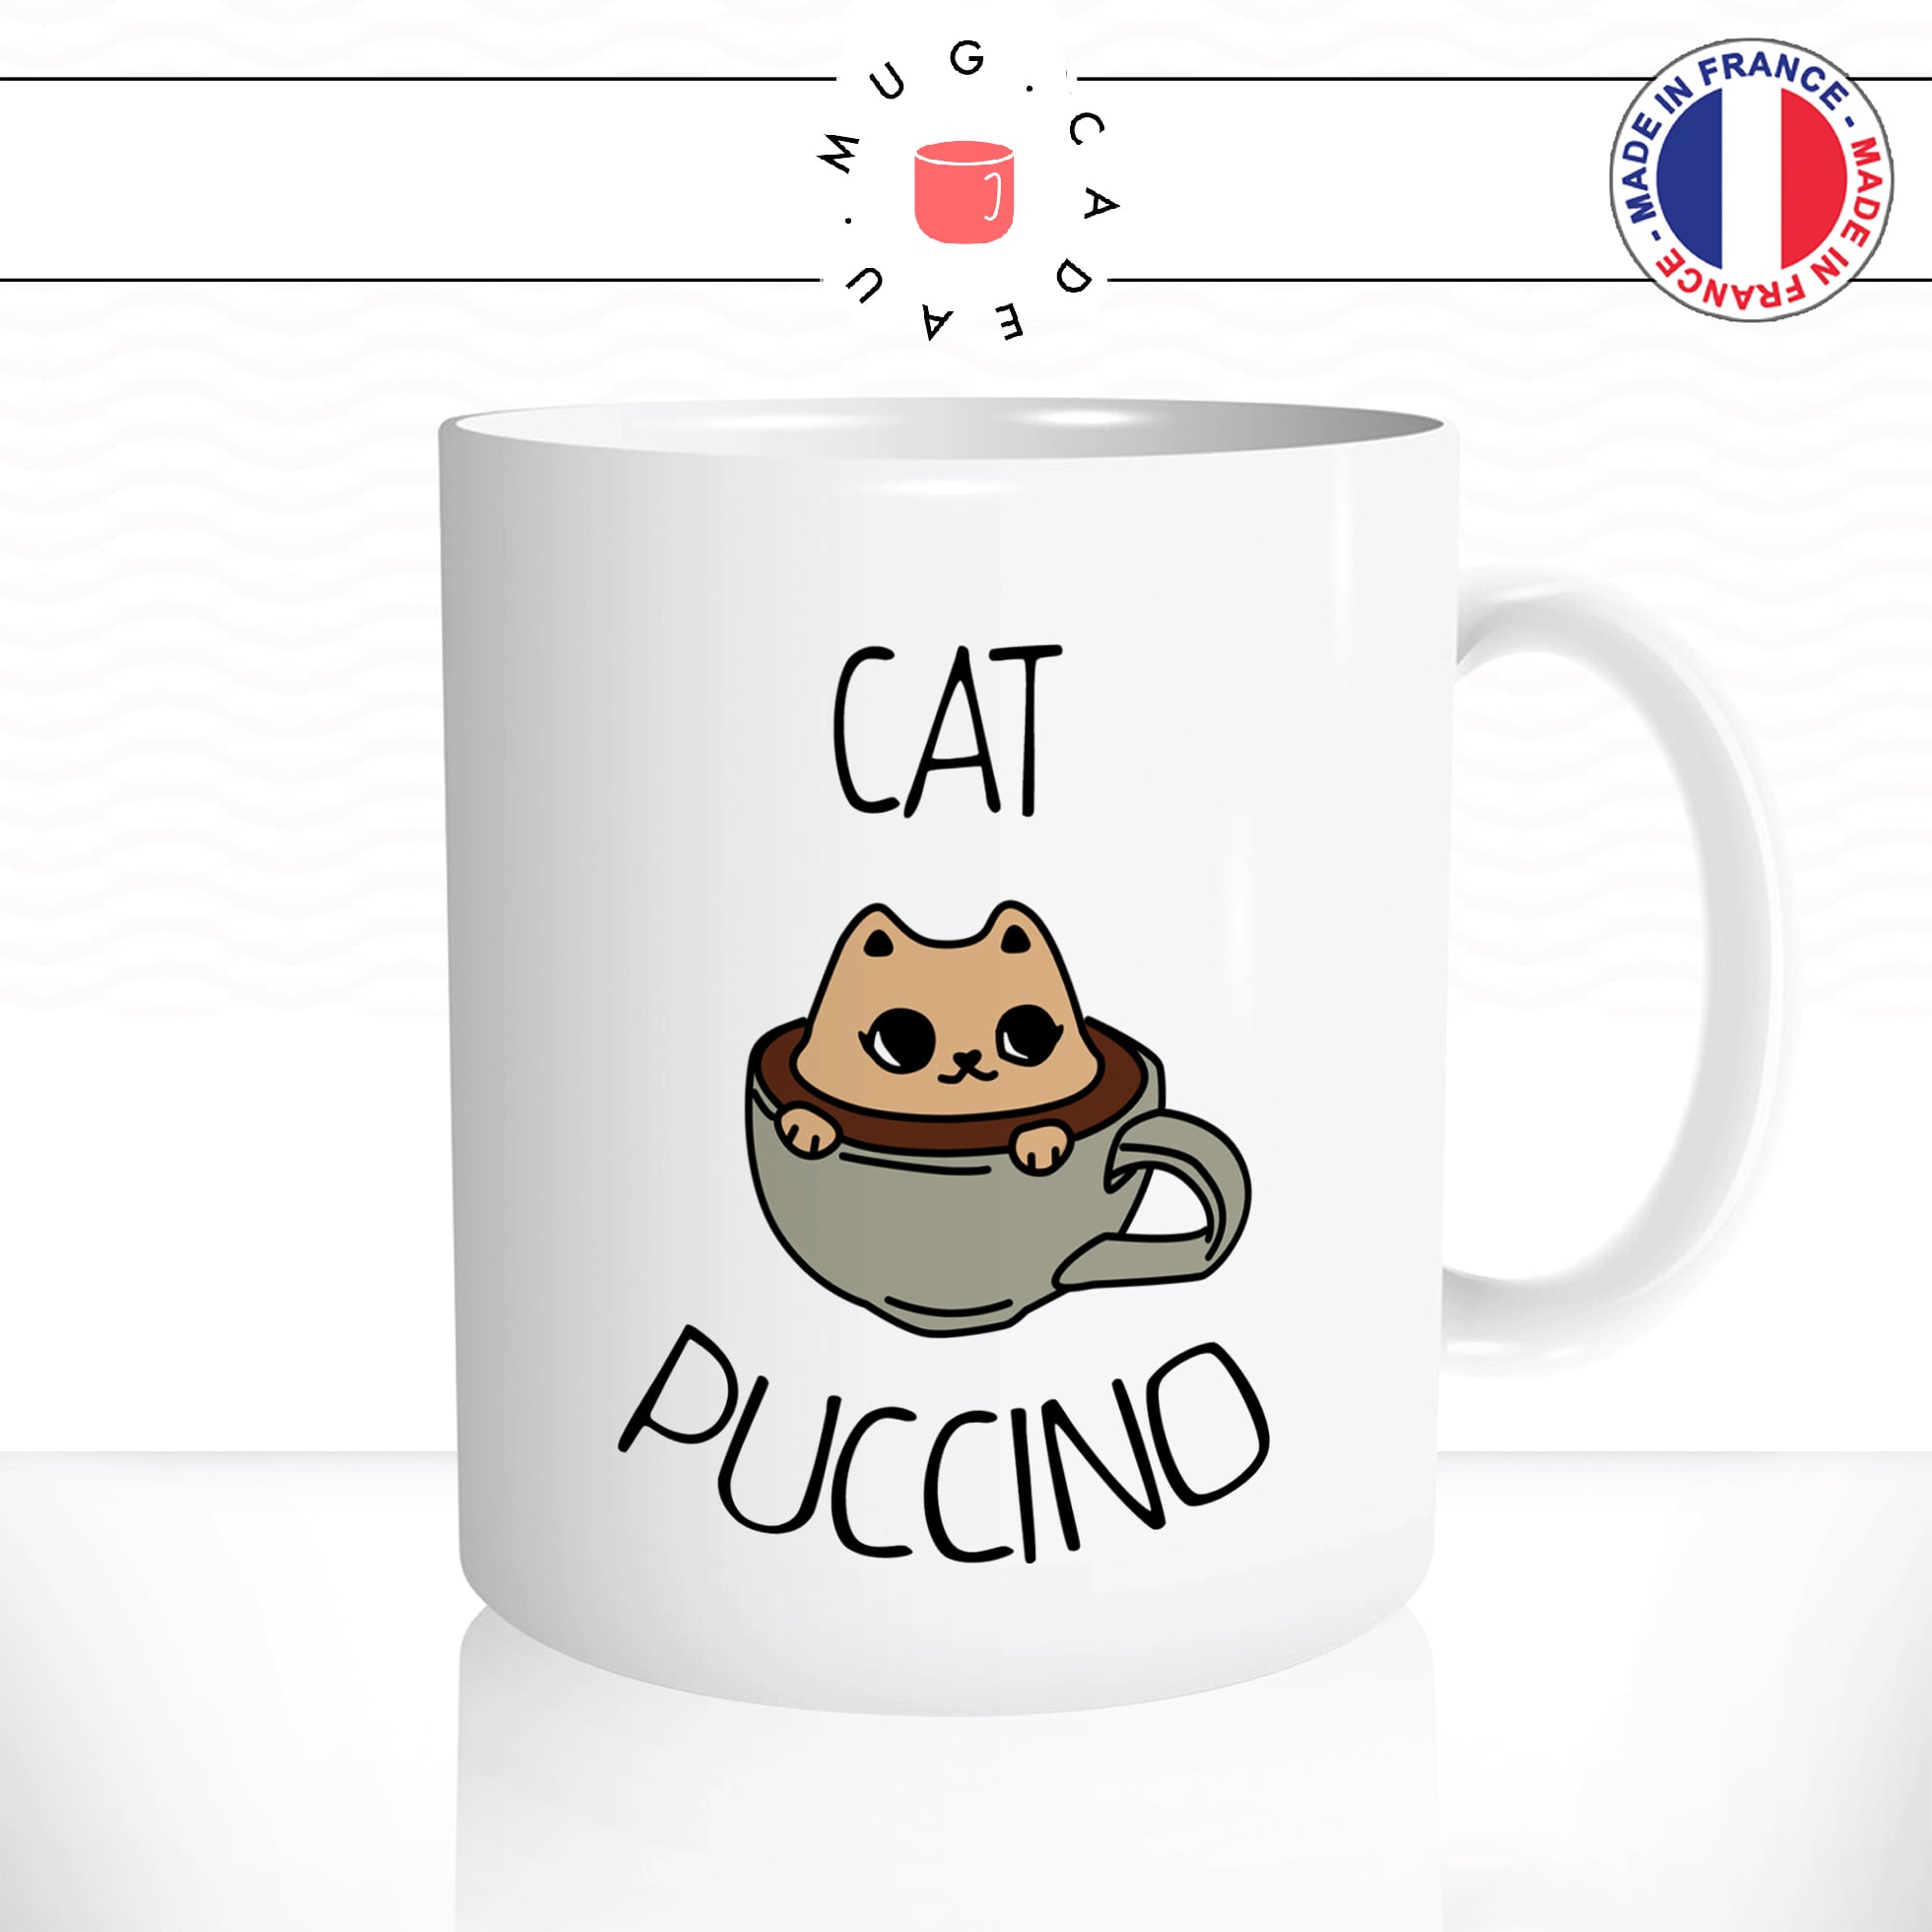 mug-tasse-cat-puccino-cappuccino-cafe-mousse-coffee-chat-chaton-idee-cadeau